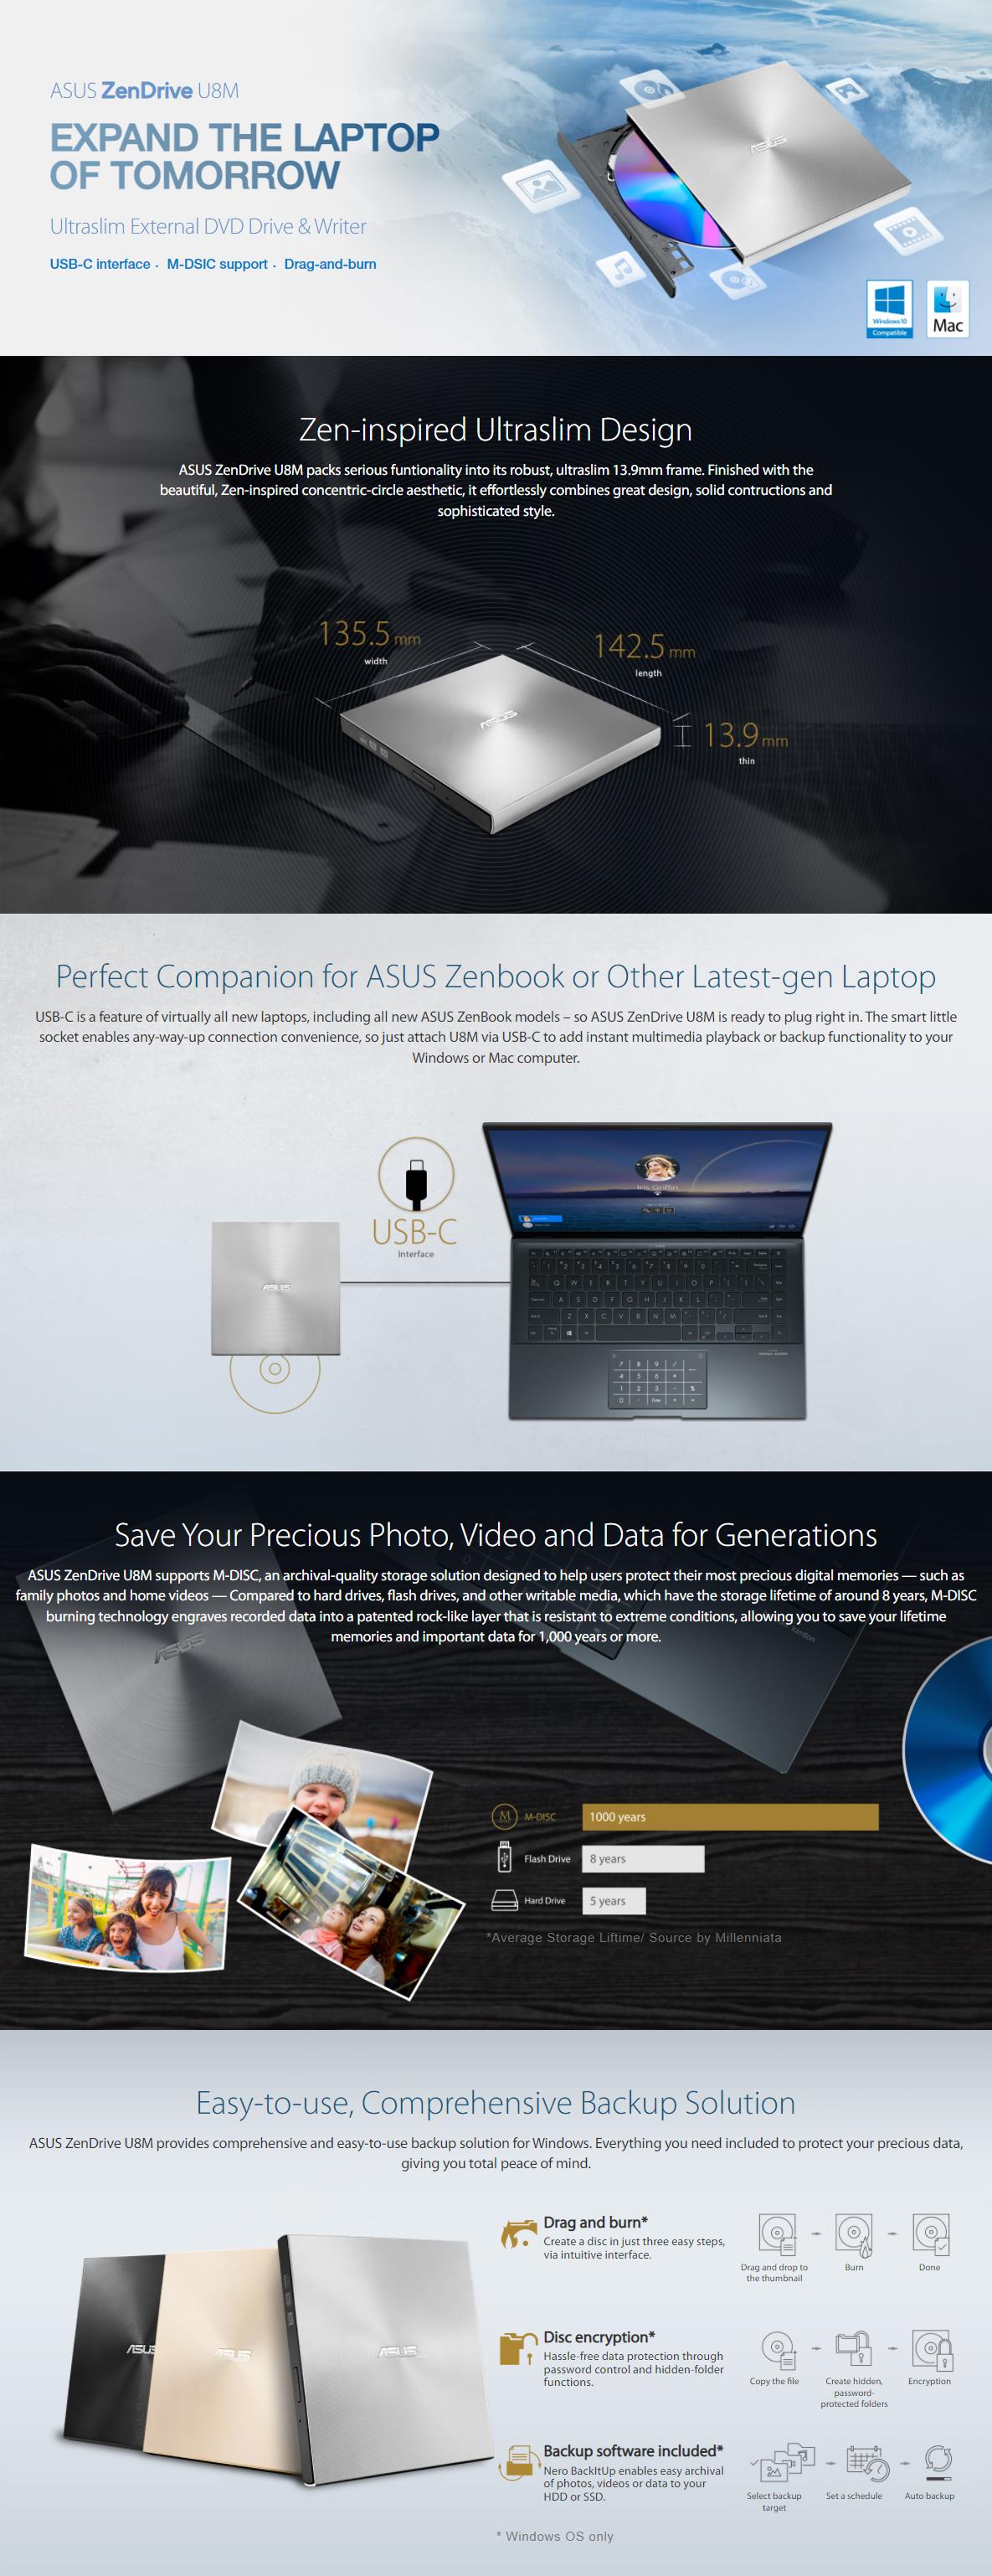 A large marketing image providing additional information about the product ASUS ZenDrive U8M External USB C DVD Writer - Additional alt info not provided